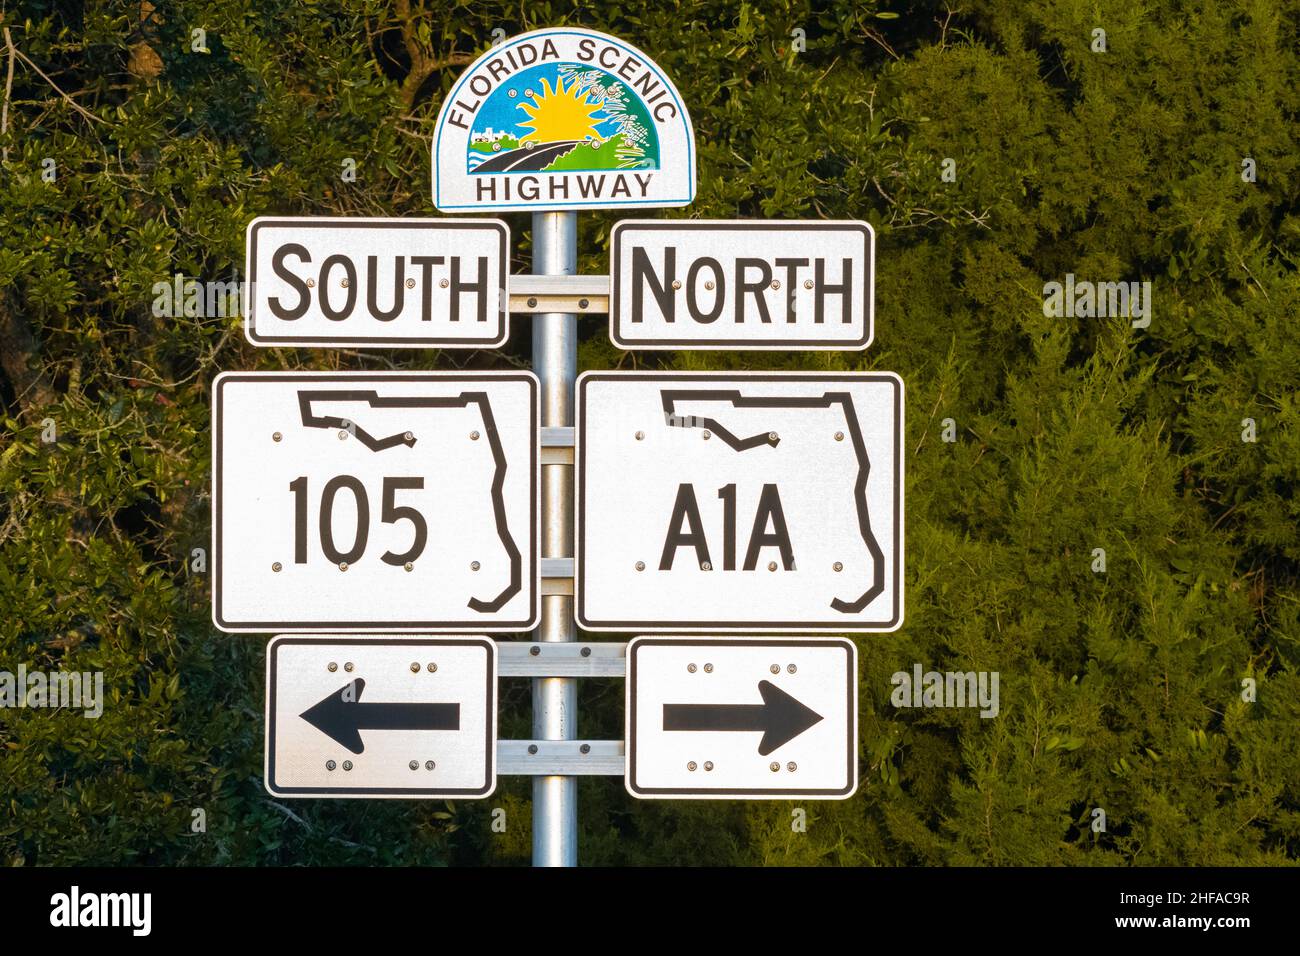 Florida Scenic Highway road sign for State Road A1A on Fort George Island at the North Station of the St. John’s River Ferry in Jacksonville, Florida. Stock Photo